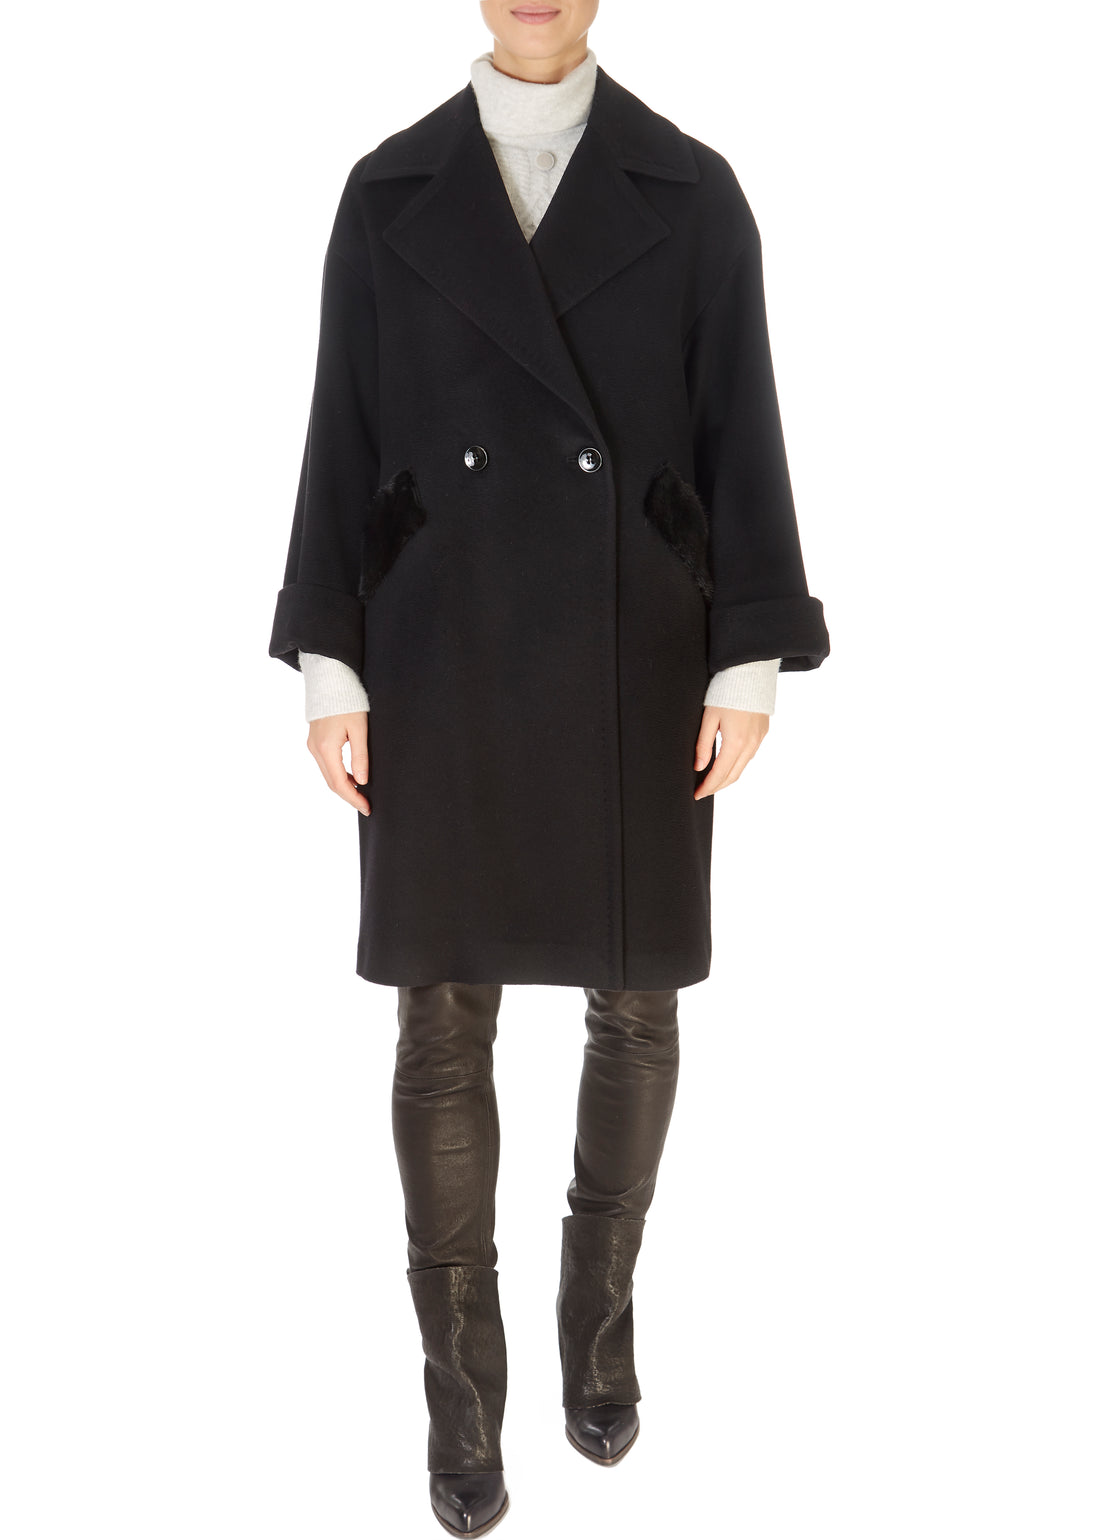 Black Wool Double Breasted Coat With Mink Trim - Jessimara